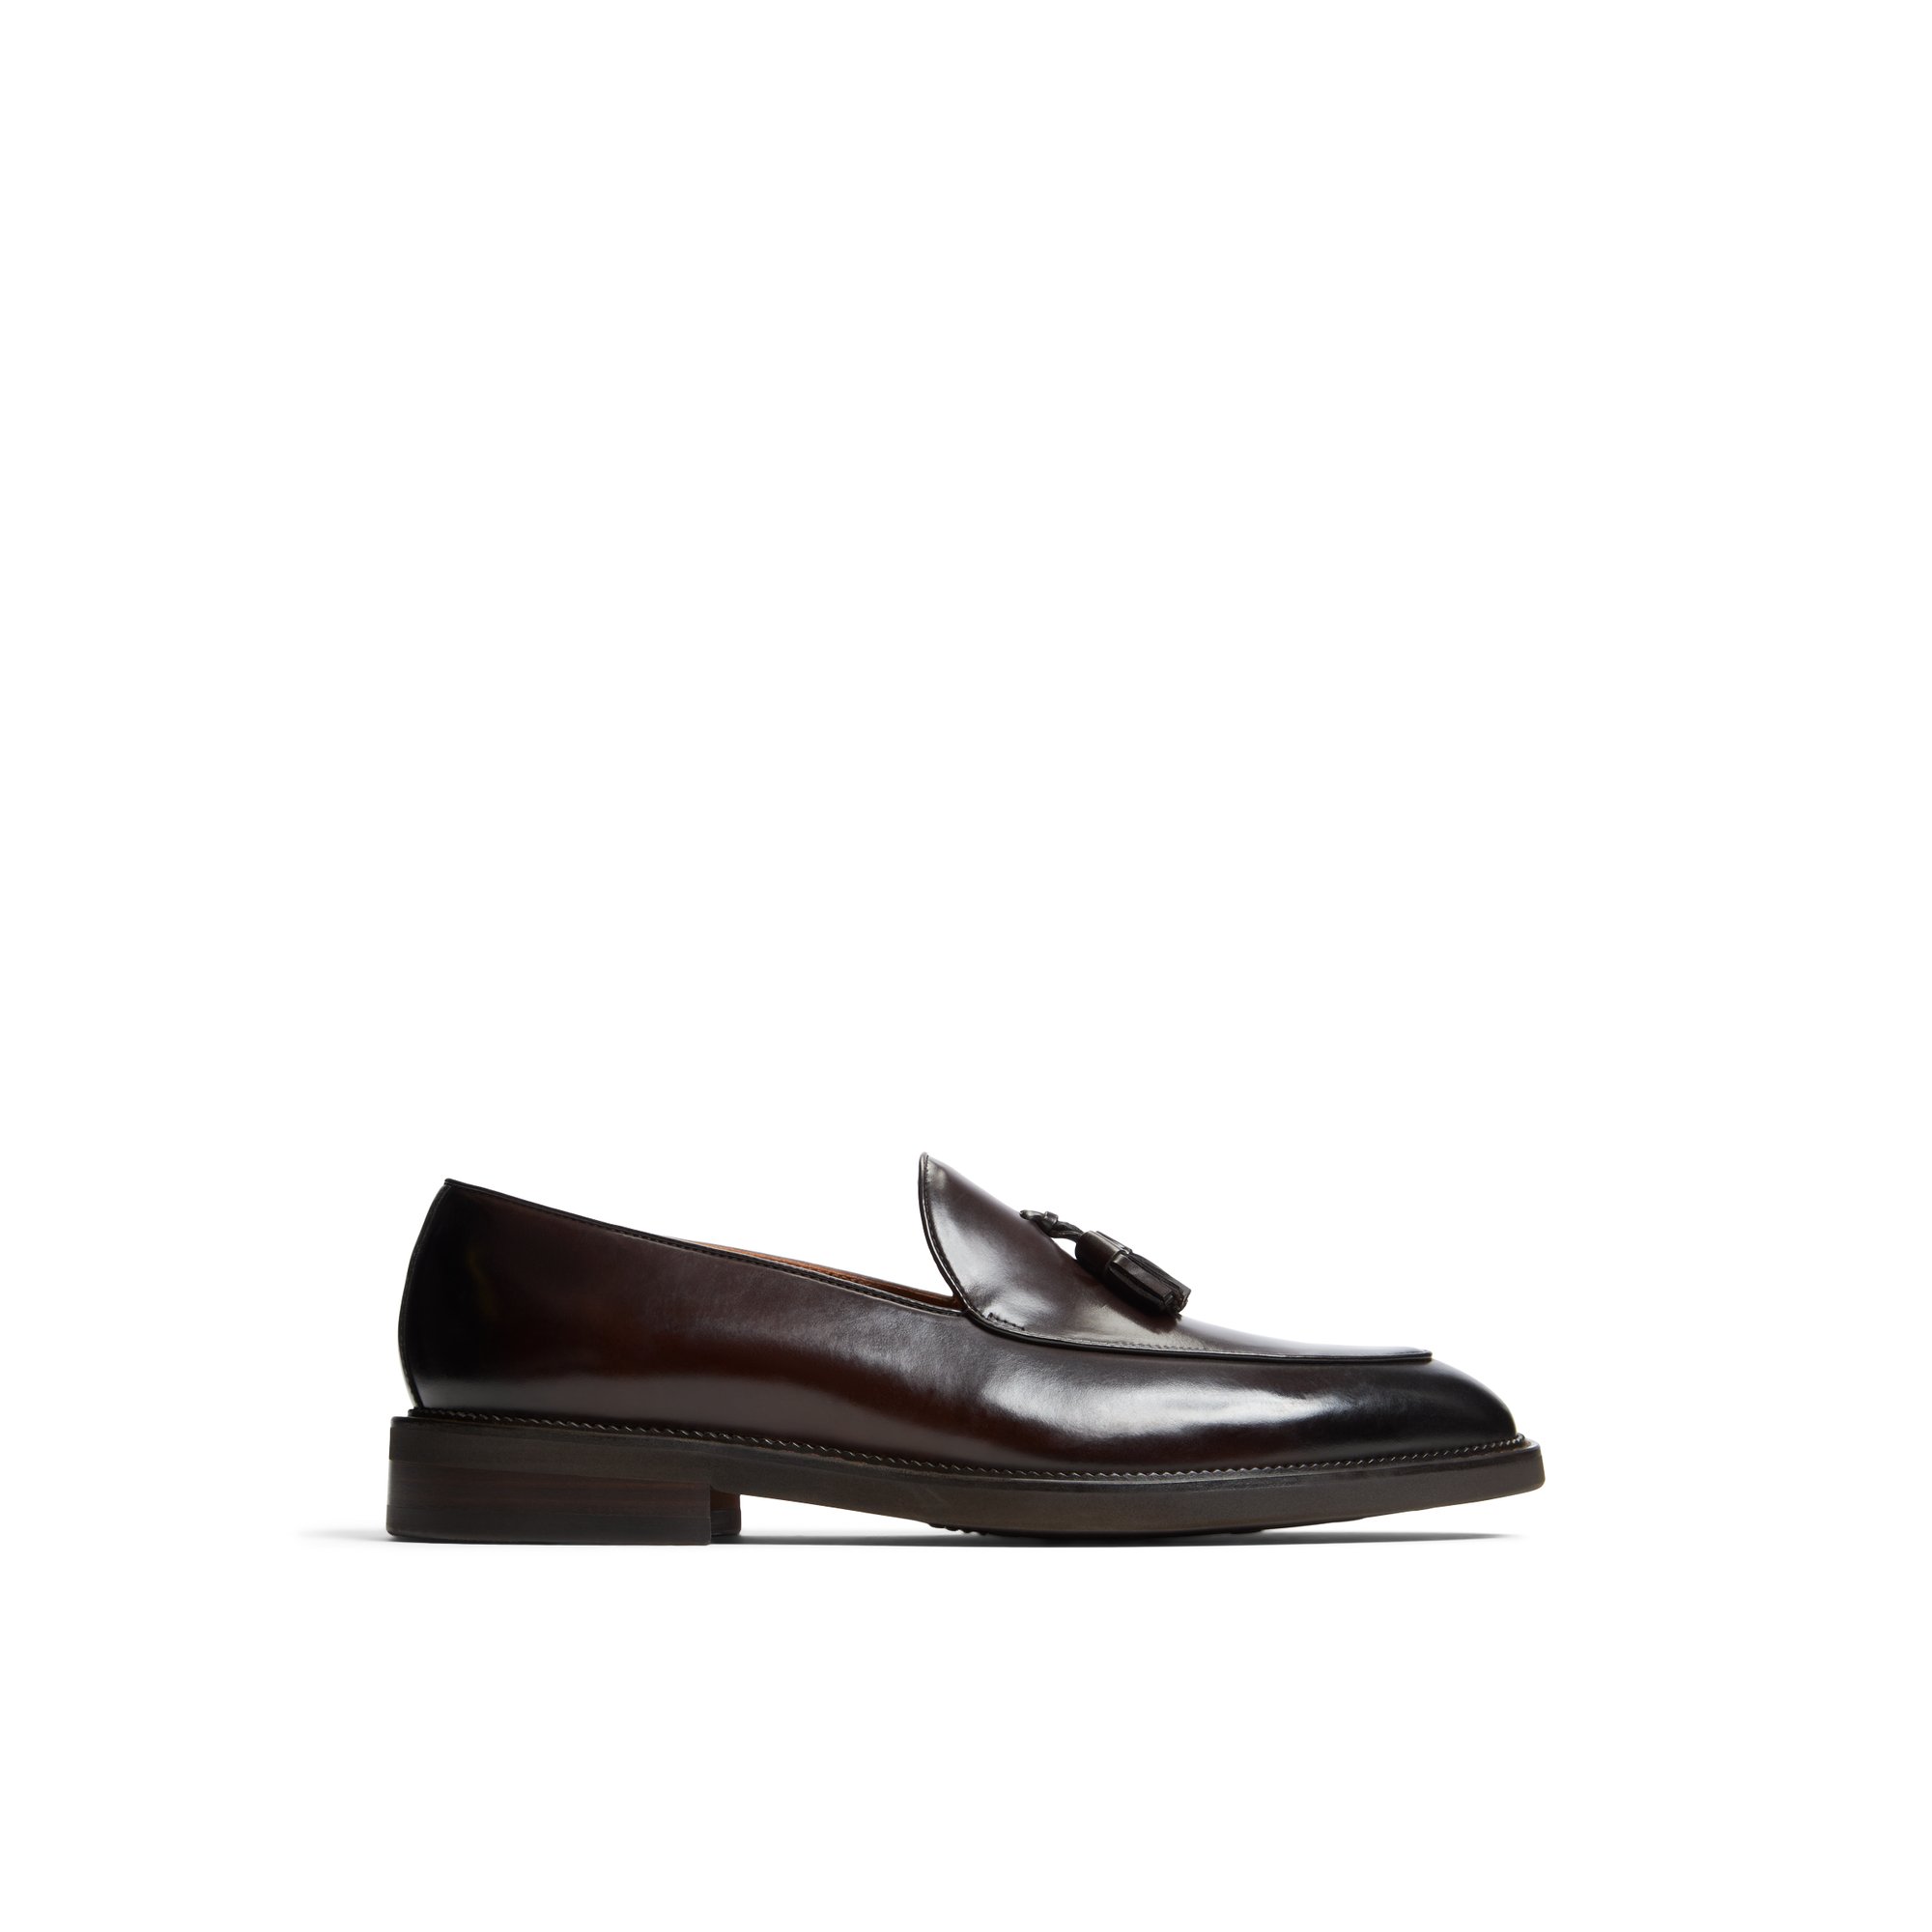 ALDO Charlo - Men's Loafers and Slip on - Brown